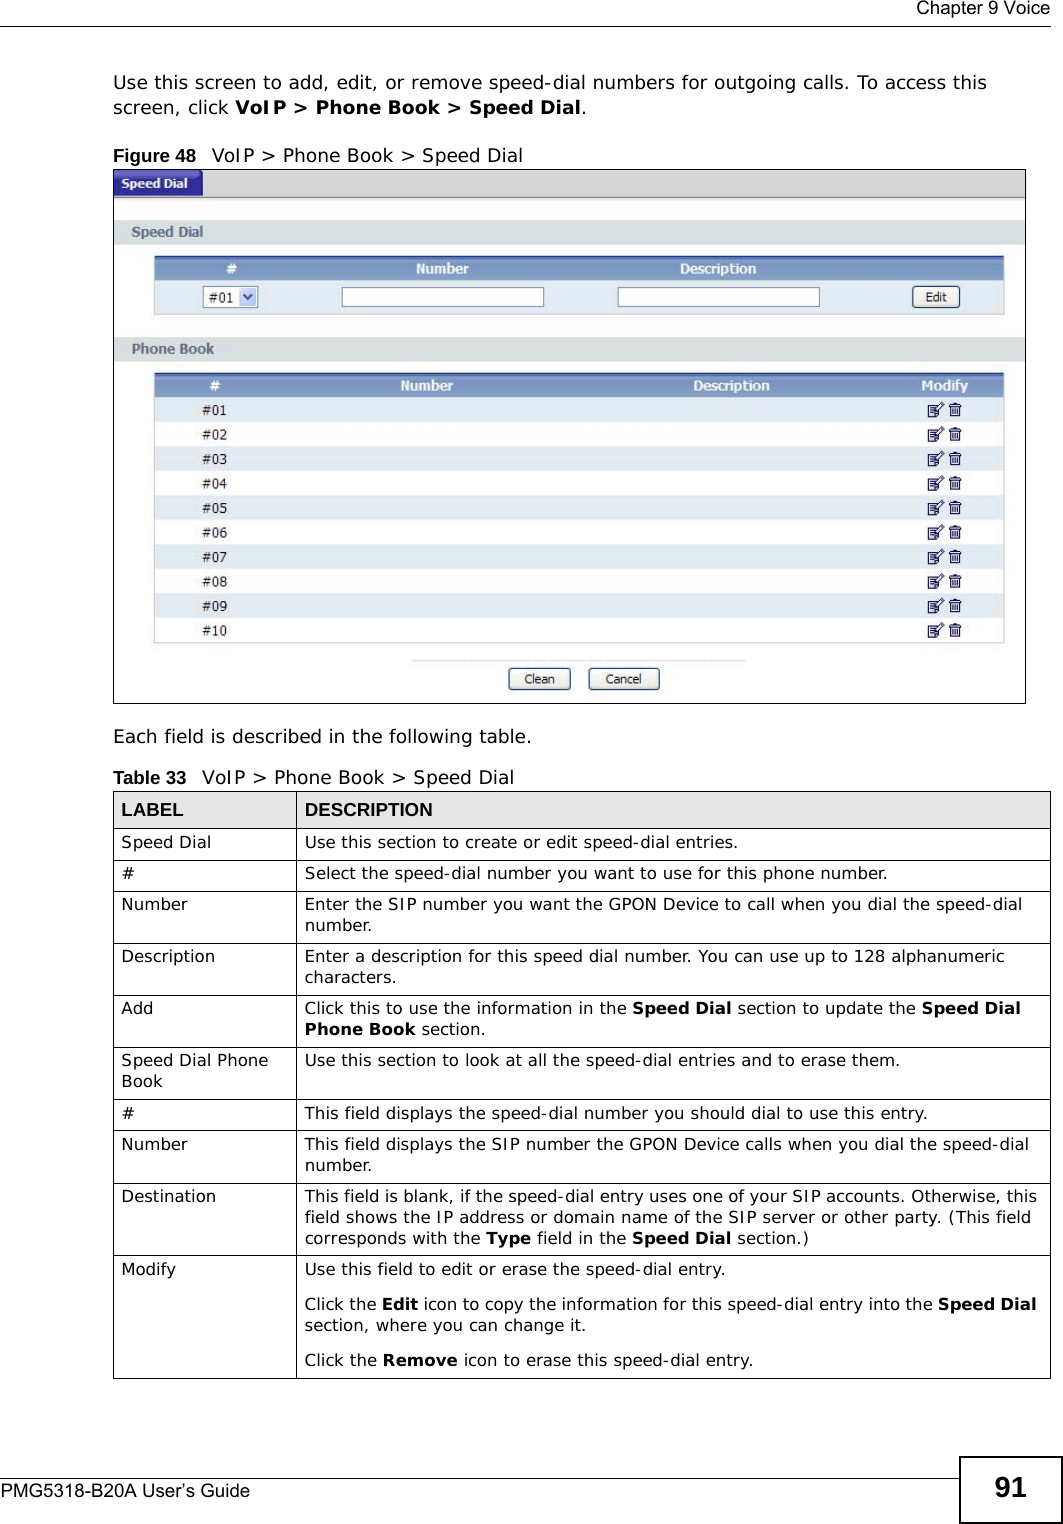  Chapter 9 VoicePMG5318-B20A User’s Guide 91Use this screen to add, edit, or remove speed-dial numbers for outgoing calls. To access this screen, click VoIP &gt; Phone Book &gt; Speed Dial.Figure 48   VoIP &gt; Phone Book &gt; Speed DialEach field is described in the following table.Table 33   VoIP &gt; Phone Book &gt; Speed DialLABEL DESCRIPTIONSpeed Dial Use this section to create or edit speed-dial entries.#Select the speed-dial number you want to use for this phone number.Number Enter the SIP number you want the GPON Device to call when you dial the speed-dial number.Description Enter a description for this speed dial number. You can use up to 128 alphanumeric characters.Add Click this to use the information in the Speed Dial section to update the Speed Dial Phone Book section.Speed Dial Phone Book Use this section to look at all the speed-dial entries and to erase them.# This field displays the speed-dial number you should dial to use this entry.Number This field displays the SIP number the GPON Device calls when you dial the speed-dial number.Destination This field is blank, if the speed-dial entry uses one of your SIP accounts. Otherwise, this field shows the IP address or domain name of the SIP server or other party. (This field corresponds with the Type field in the Speed Dial section.)Modify Use this field to edit or erase the speed-dial entry.Click the Edit icon to copy the information for this speed-dial entry into the Speed Dial section, where you can change it.Click the Remove icon to erase this speed-dial entry.